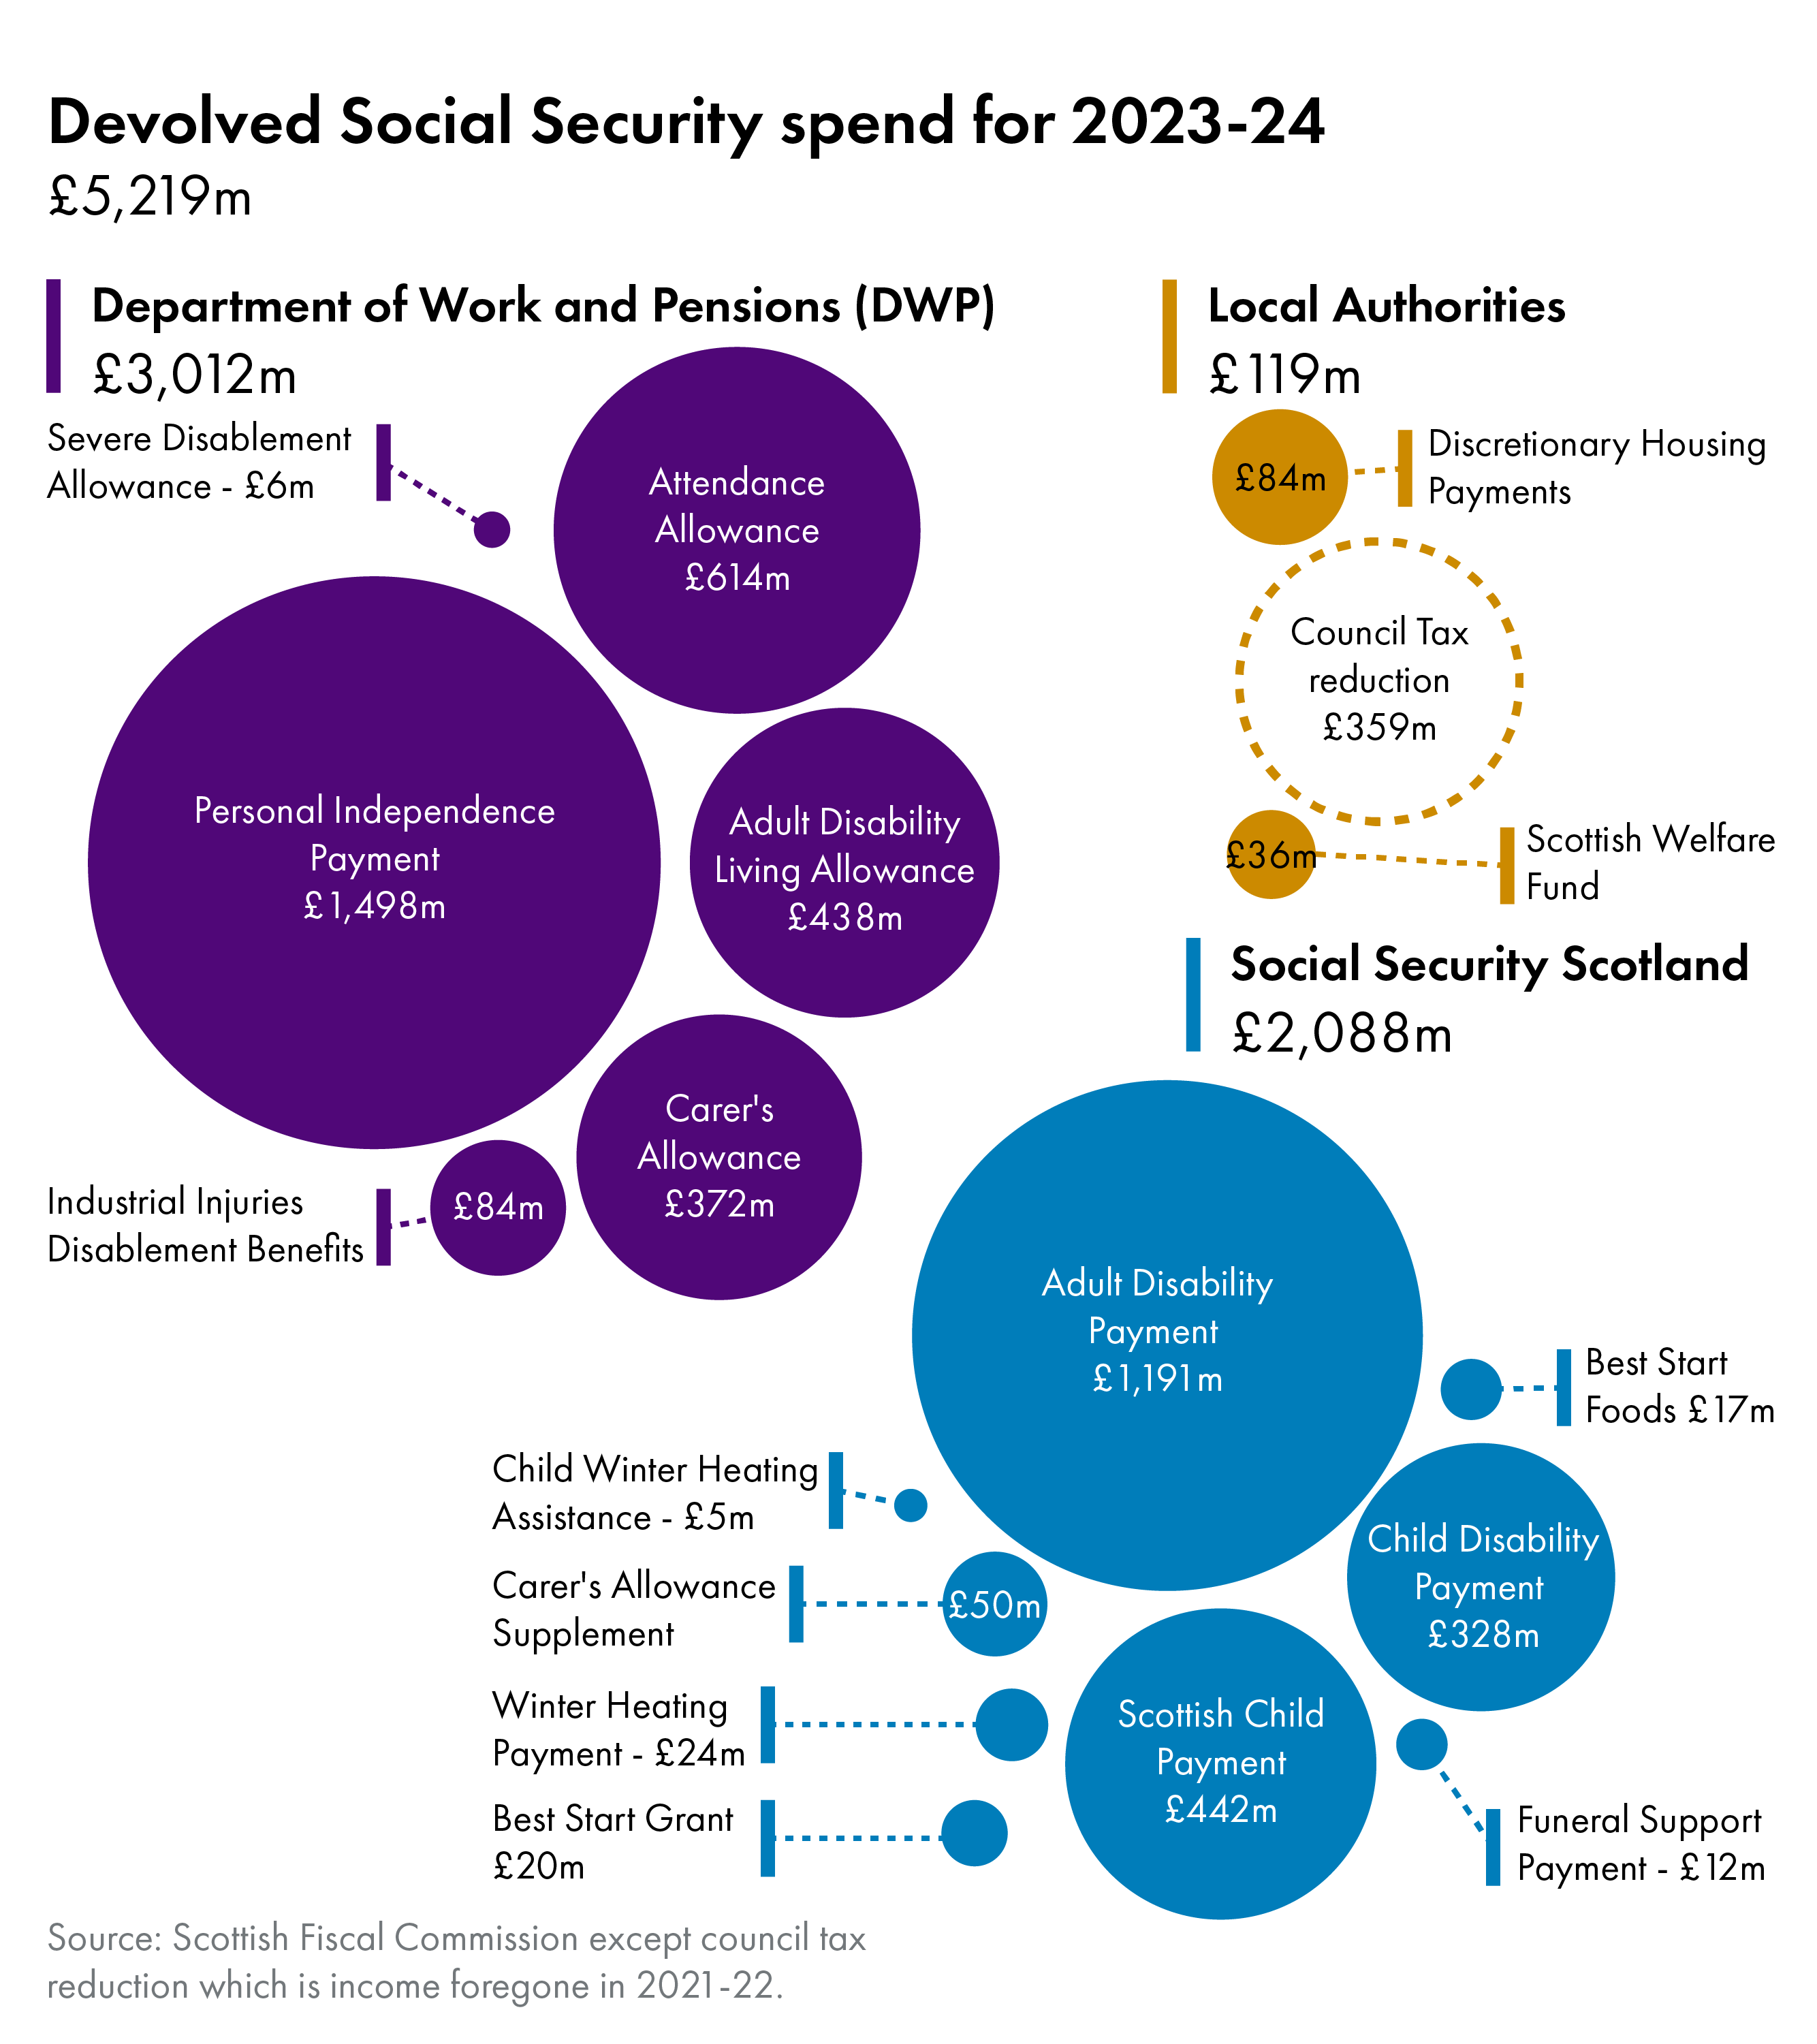 Bubble chart showing breakdown of Social Security spending in 2023-24. DWP spend is £3,012 million, Social Security Scotland £2,088 million, and Local Authorities £119 million.